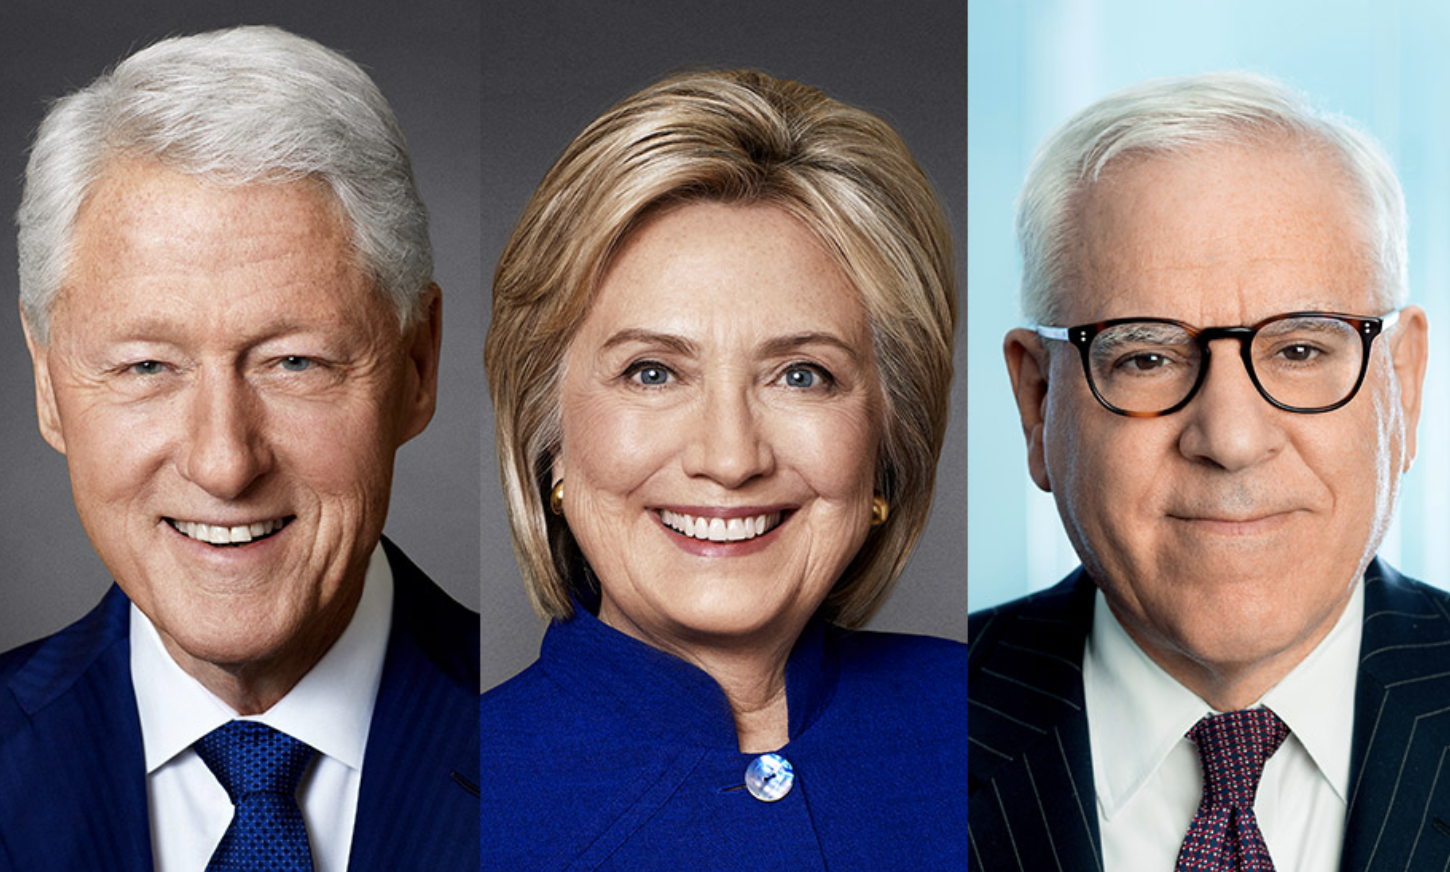 President Bill Clinton and Secretary Hillary Rodham Clinton in Conversation with David Rubenstein at NYC's 92Y May 4